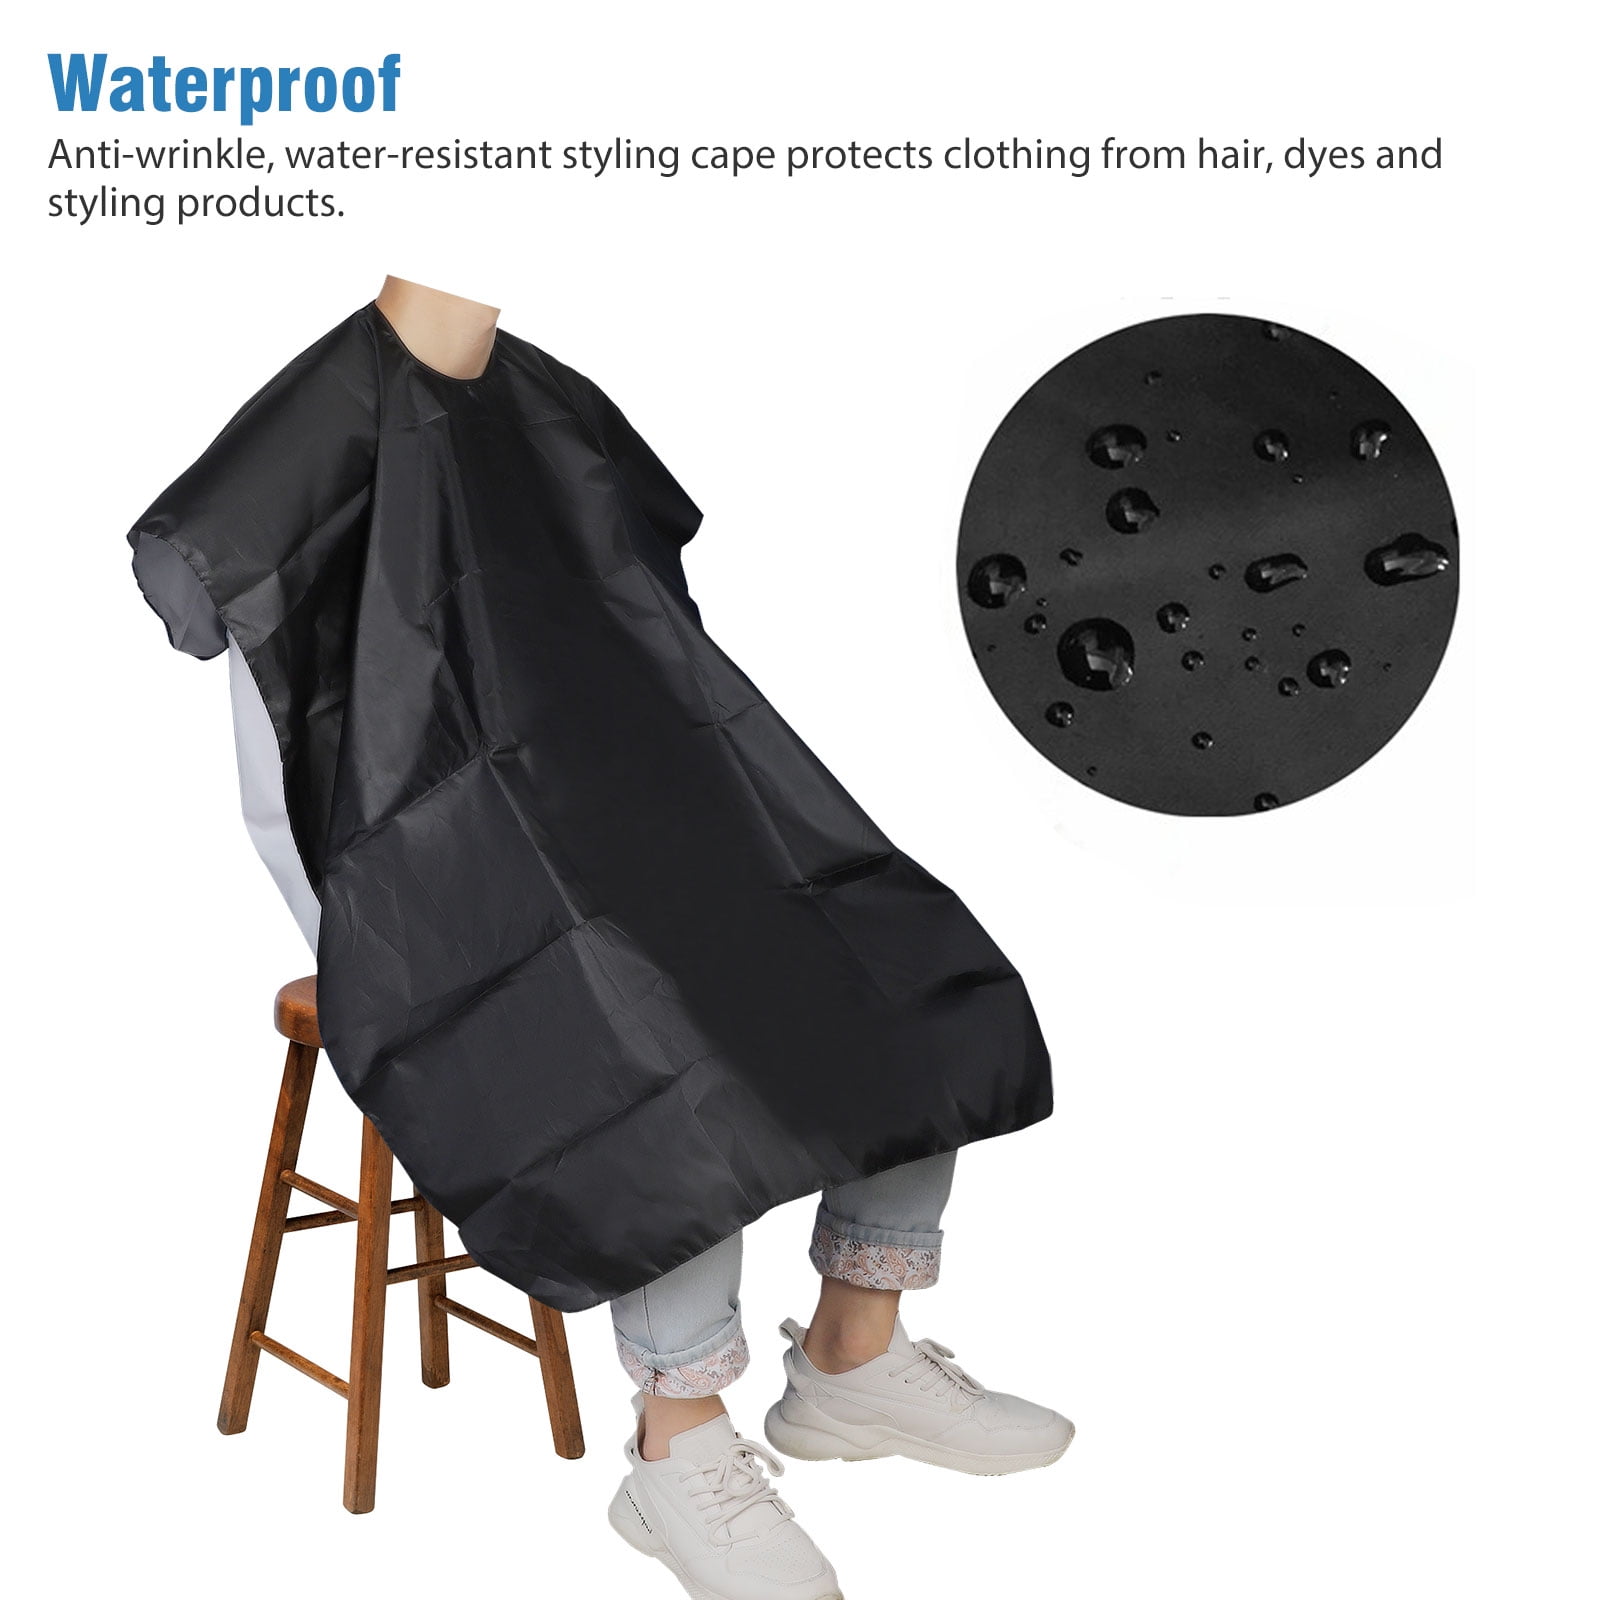 Hairdresser-Capes-Professional-Cutting-Hair-Waterproof-Cloth-Salon